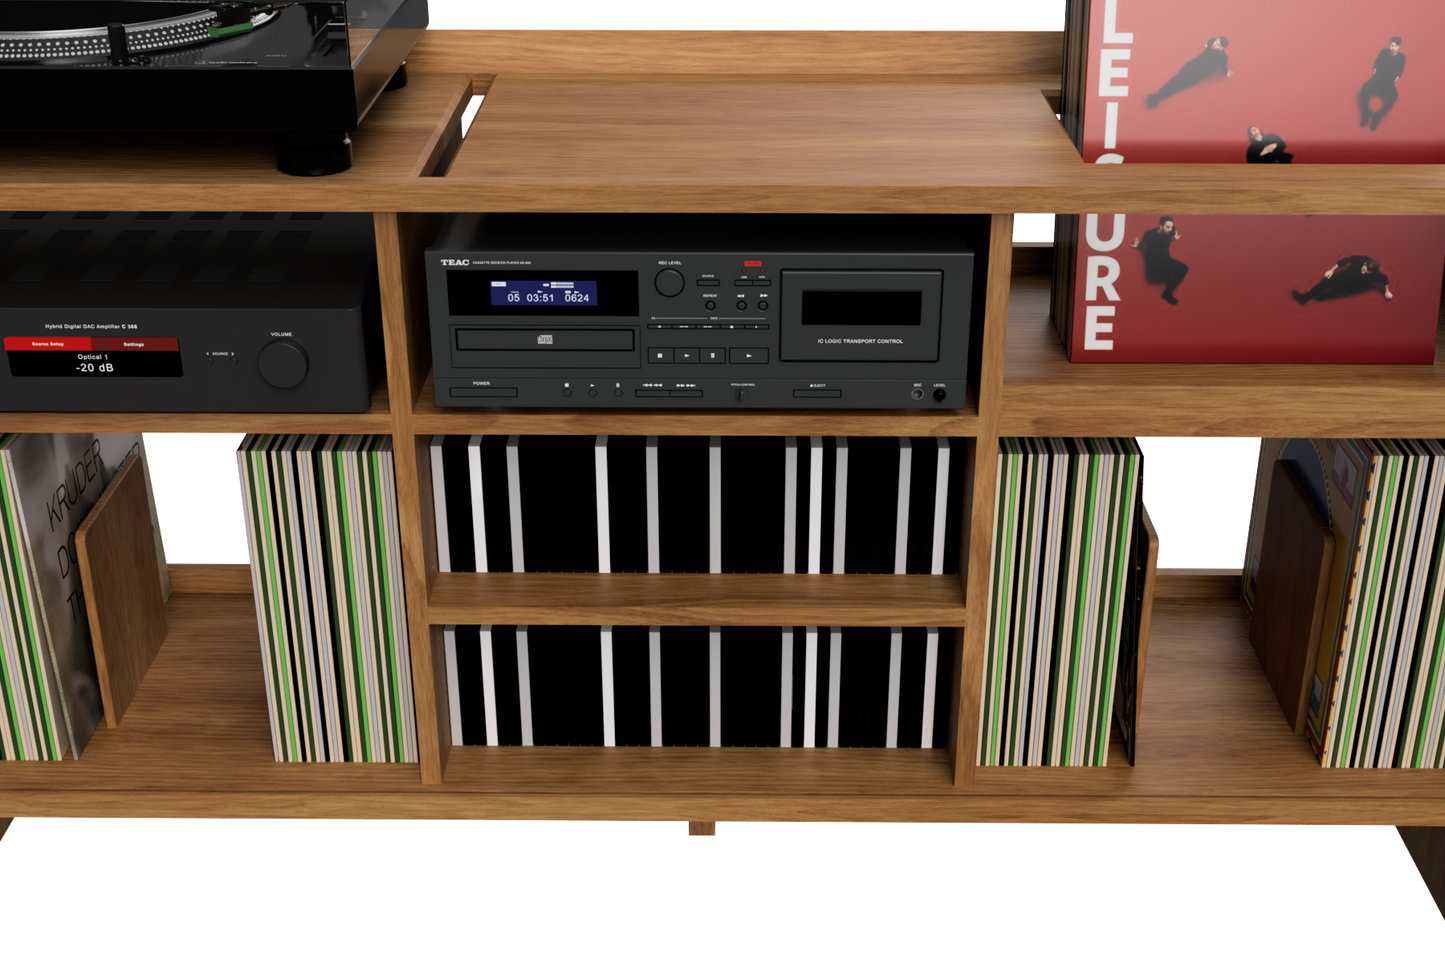 Valhalla Castle 1500 Turntable CD Cabinet https://valhallaudio.com/products/castle-1500-record-cabinet